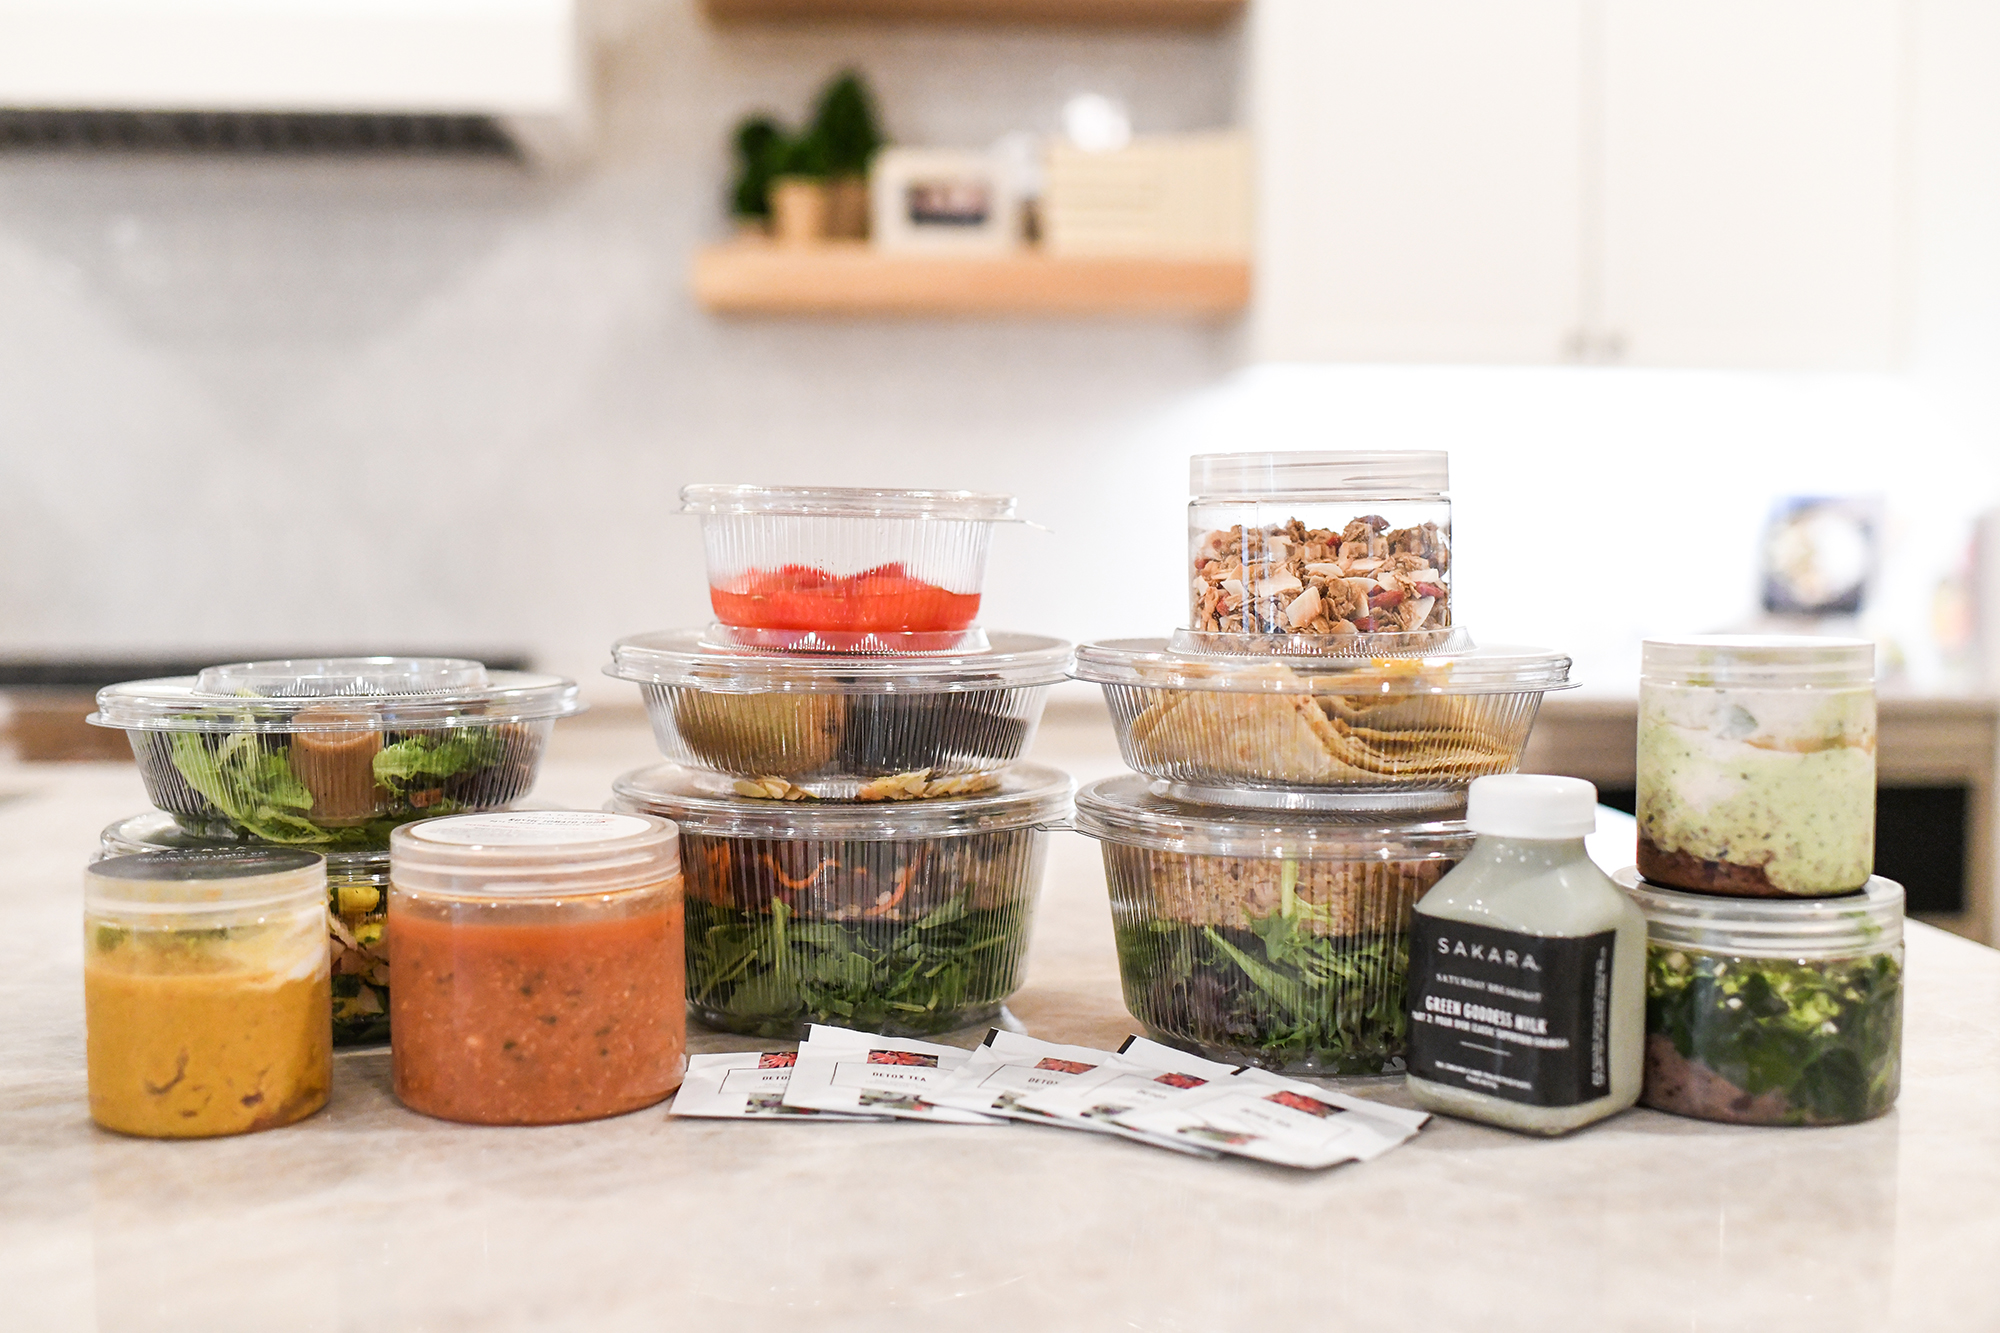 SAKARA LIFE // PLANT-BASED MEAL DELIVERY SERVICE: A REVIEW